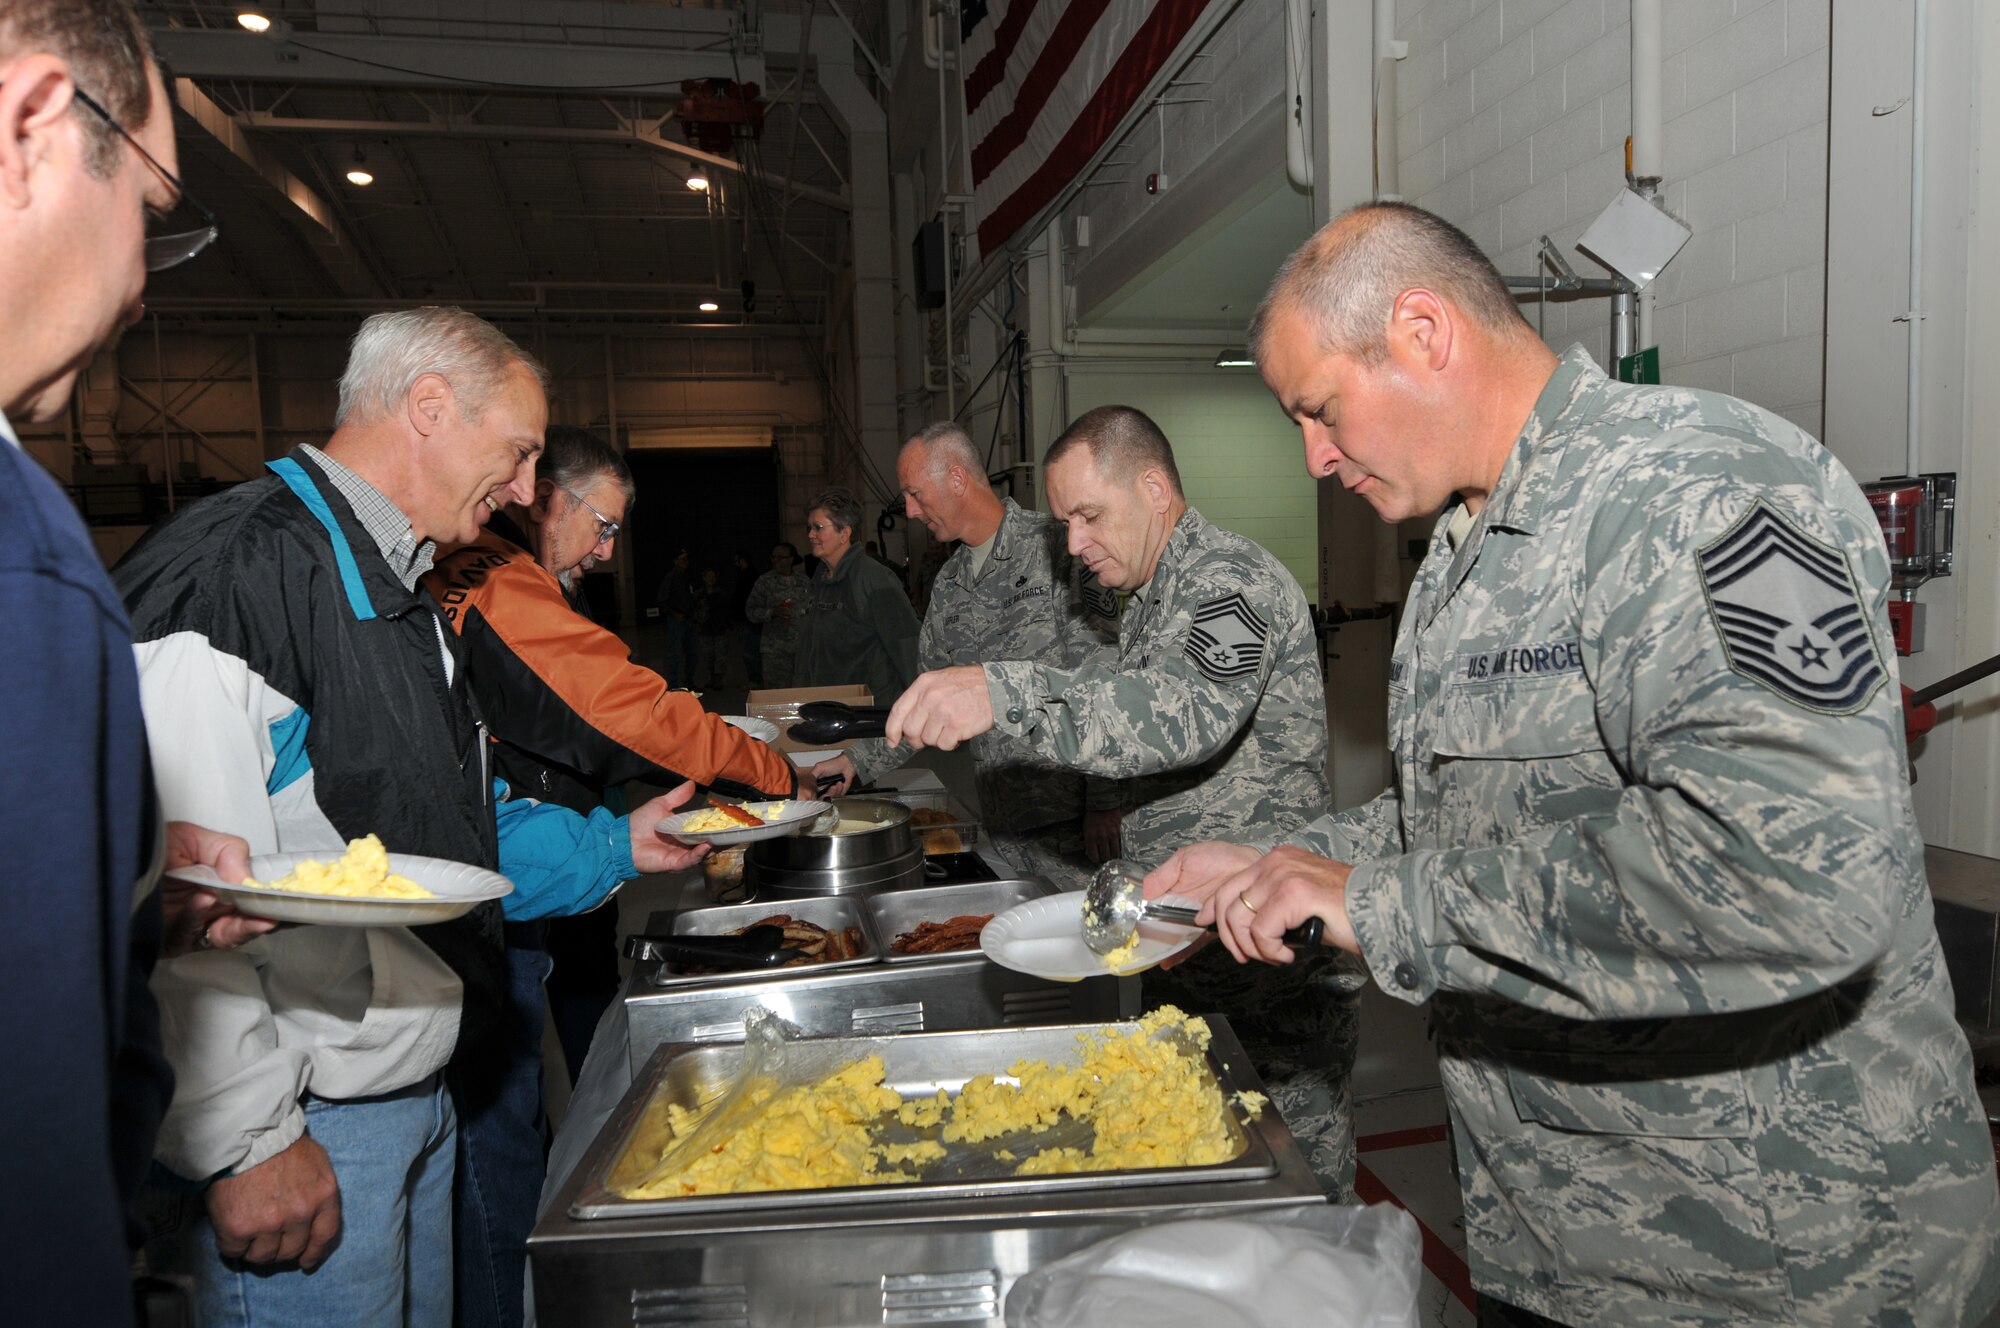 U.S. Air Force Chief Master Sgt. Ritchie L. Stiller, 145th Communication Squadron, along with other chiefs from the North Carolina Air National Guard, serve breakfast to retirees at the 18th Annual Retiree Breakfast held in a hanger at the North Carolina Air National Guard base, Charlotte Douglas Intl. Airport, Friday, Oct. 25, 2013. (Air National Guard photo by Master Sgt. Patricia F. Moran/Released) 